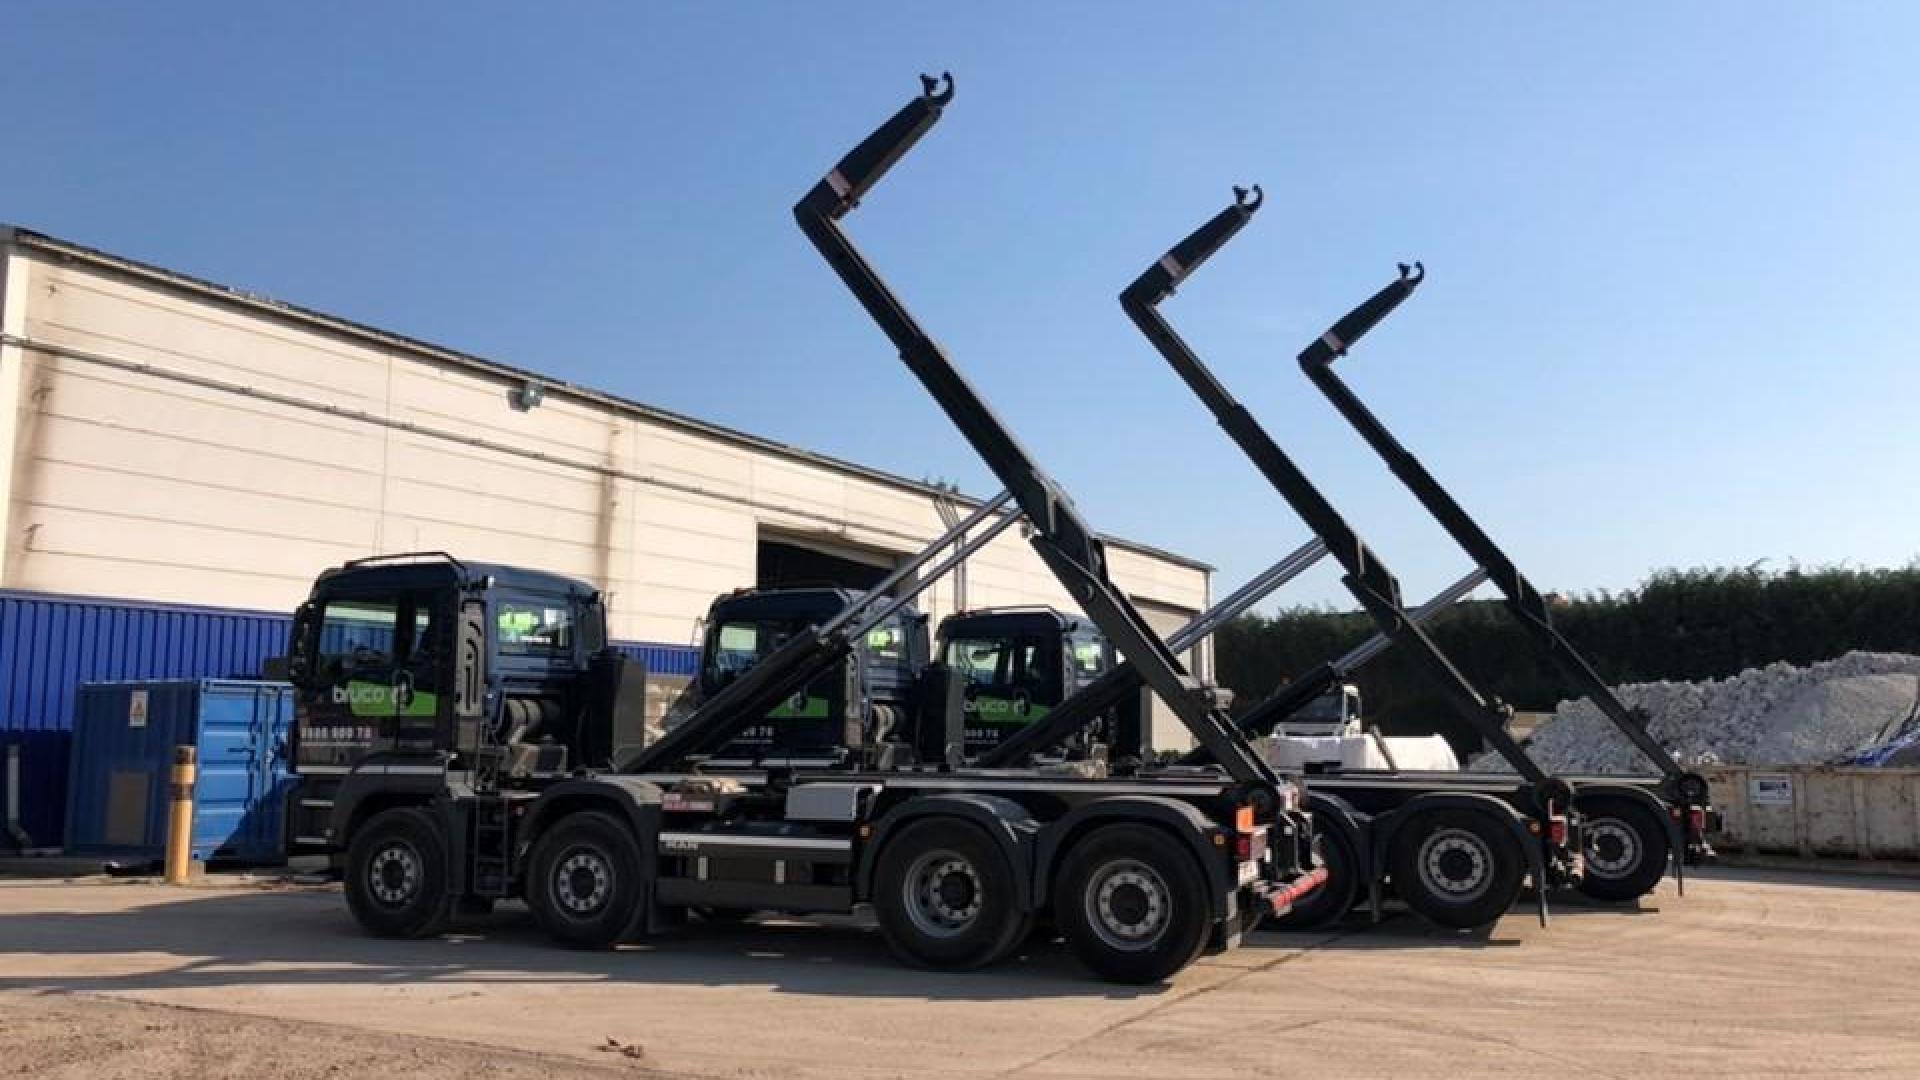 First 3 of 12 new MAN vehicles all equipped with VDL 25 tonne hooklift system with DCP 